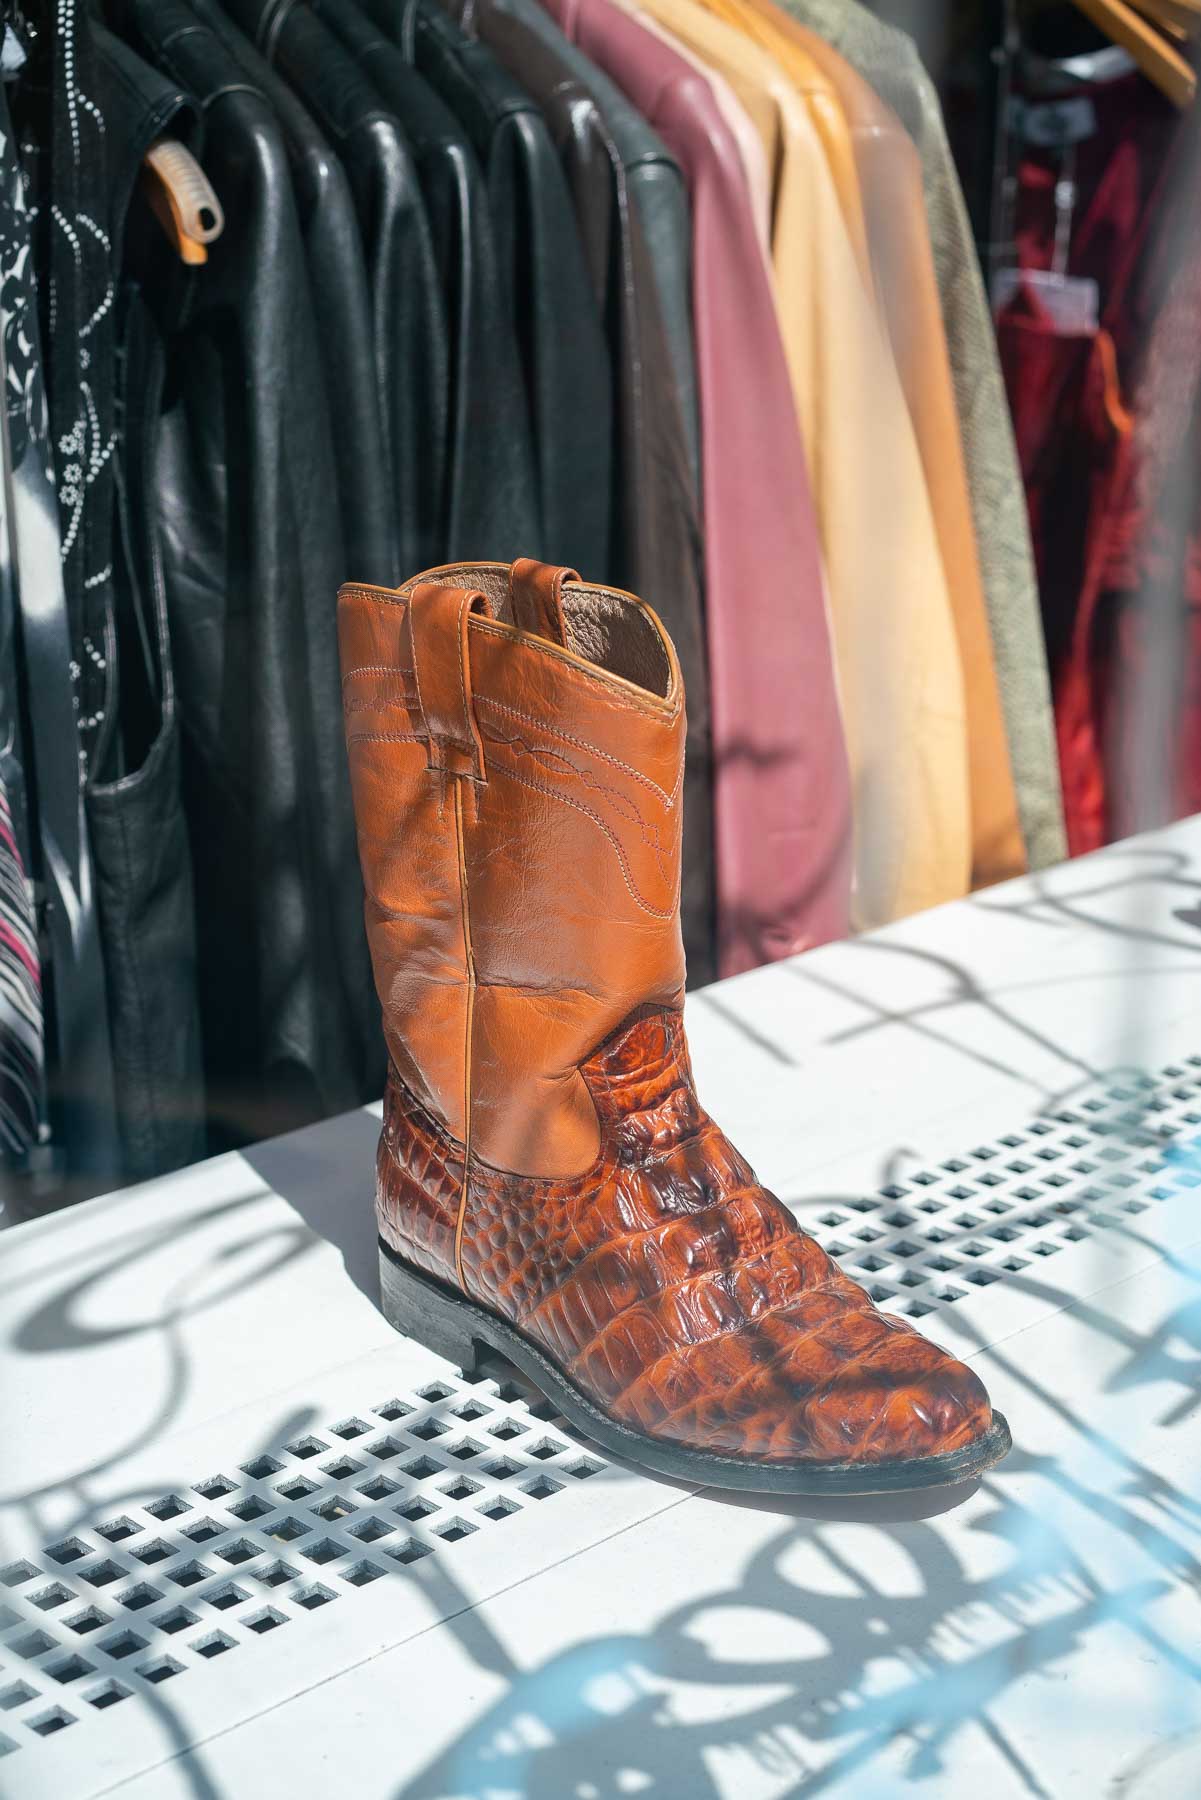 Cowboy boot on display behind a window at the Vintage Twin in the Lower East Side, with a rack of jackets behind it. The Vintage Twin is one of the best thrift stores in New York City